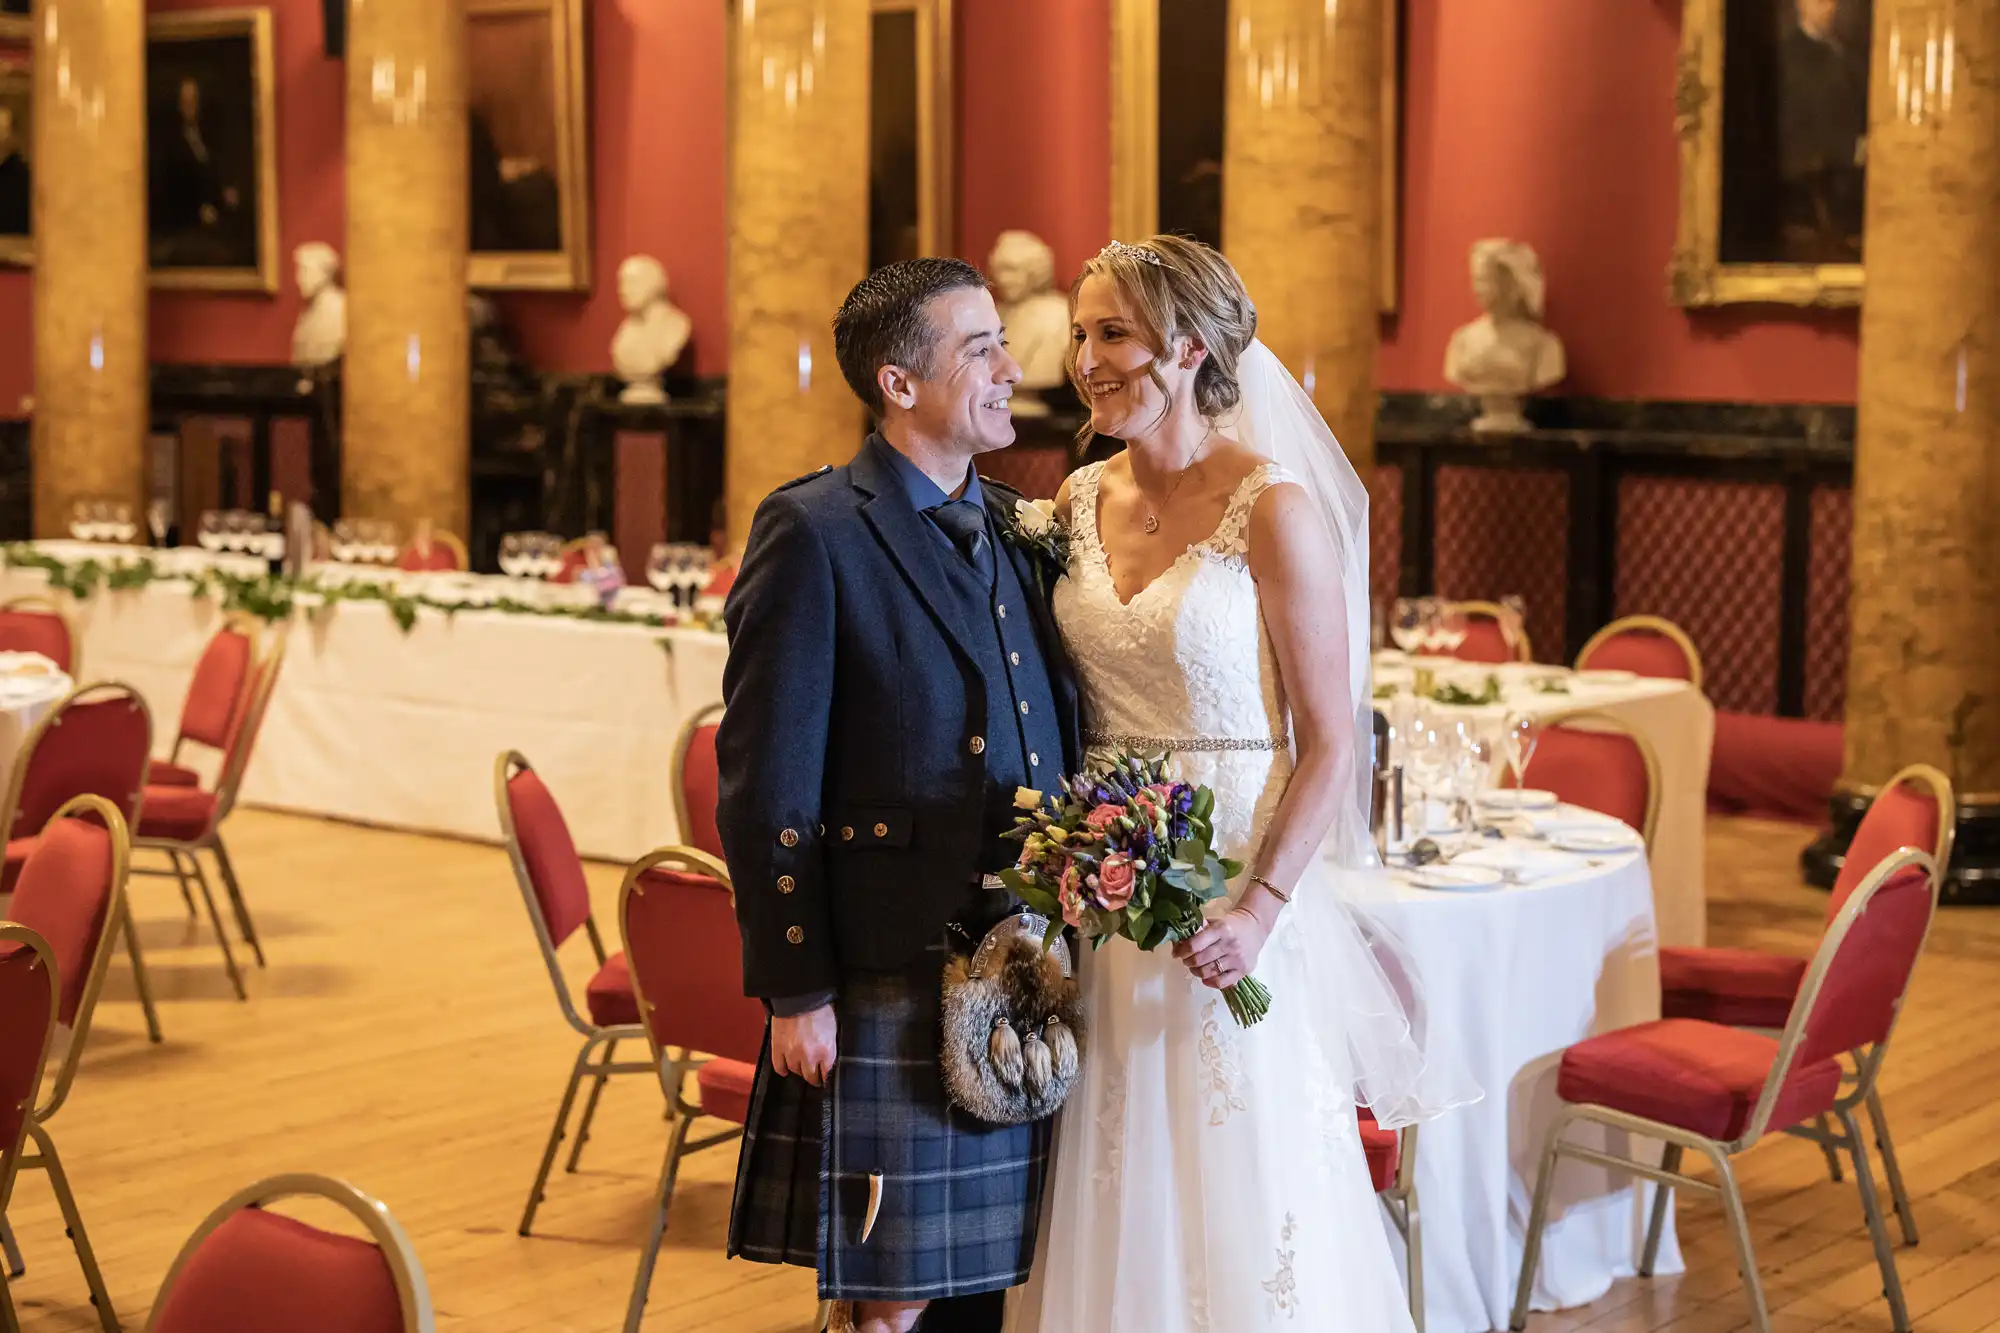 A couple, dressed in wedding attire, stand smiling at each other in a grand room with red walls, statues, and set dining tables. The groom wears a kilt and the bride holds a bouquet of flowers.